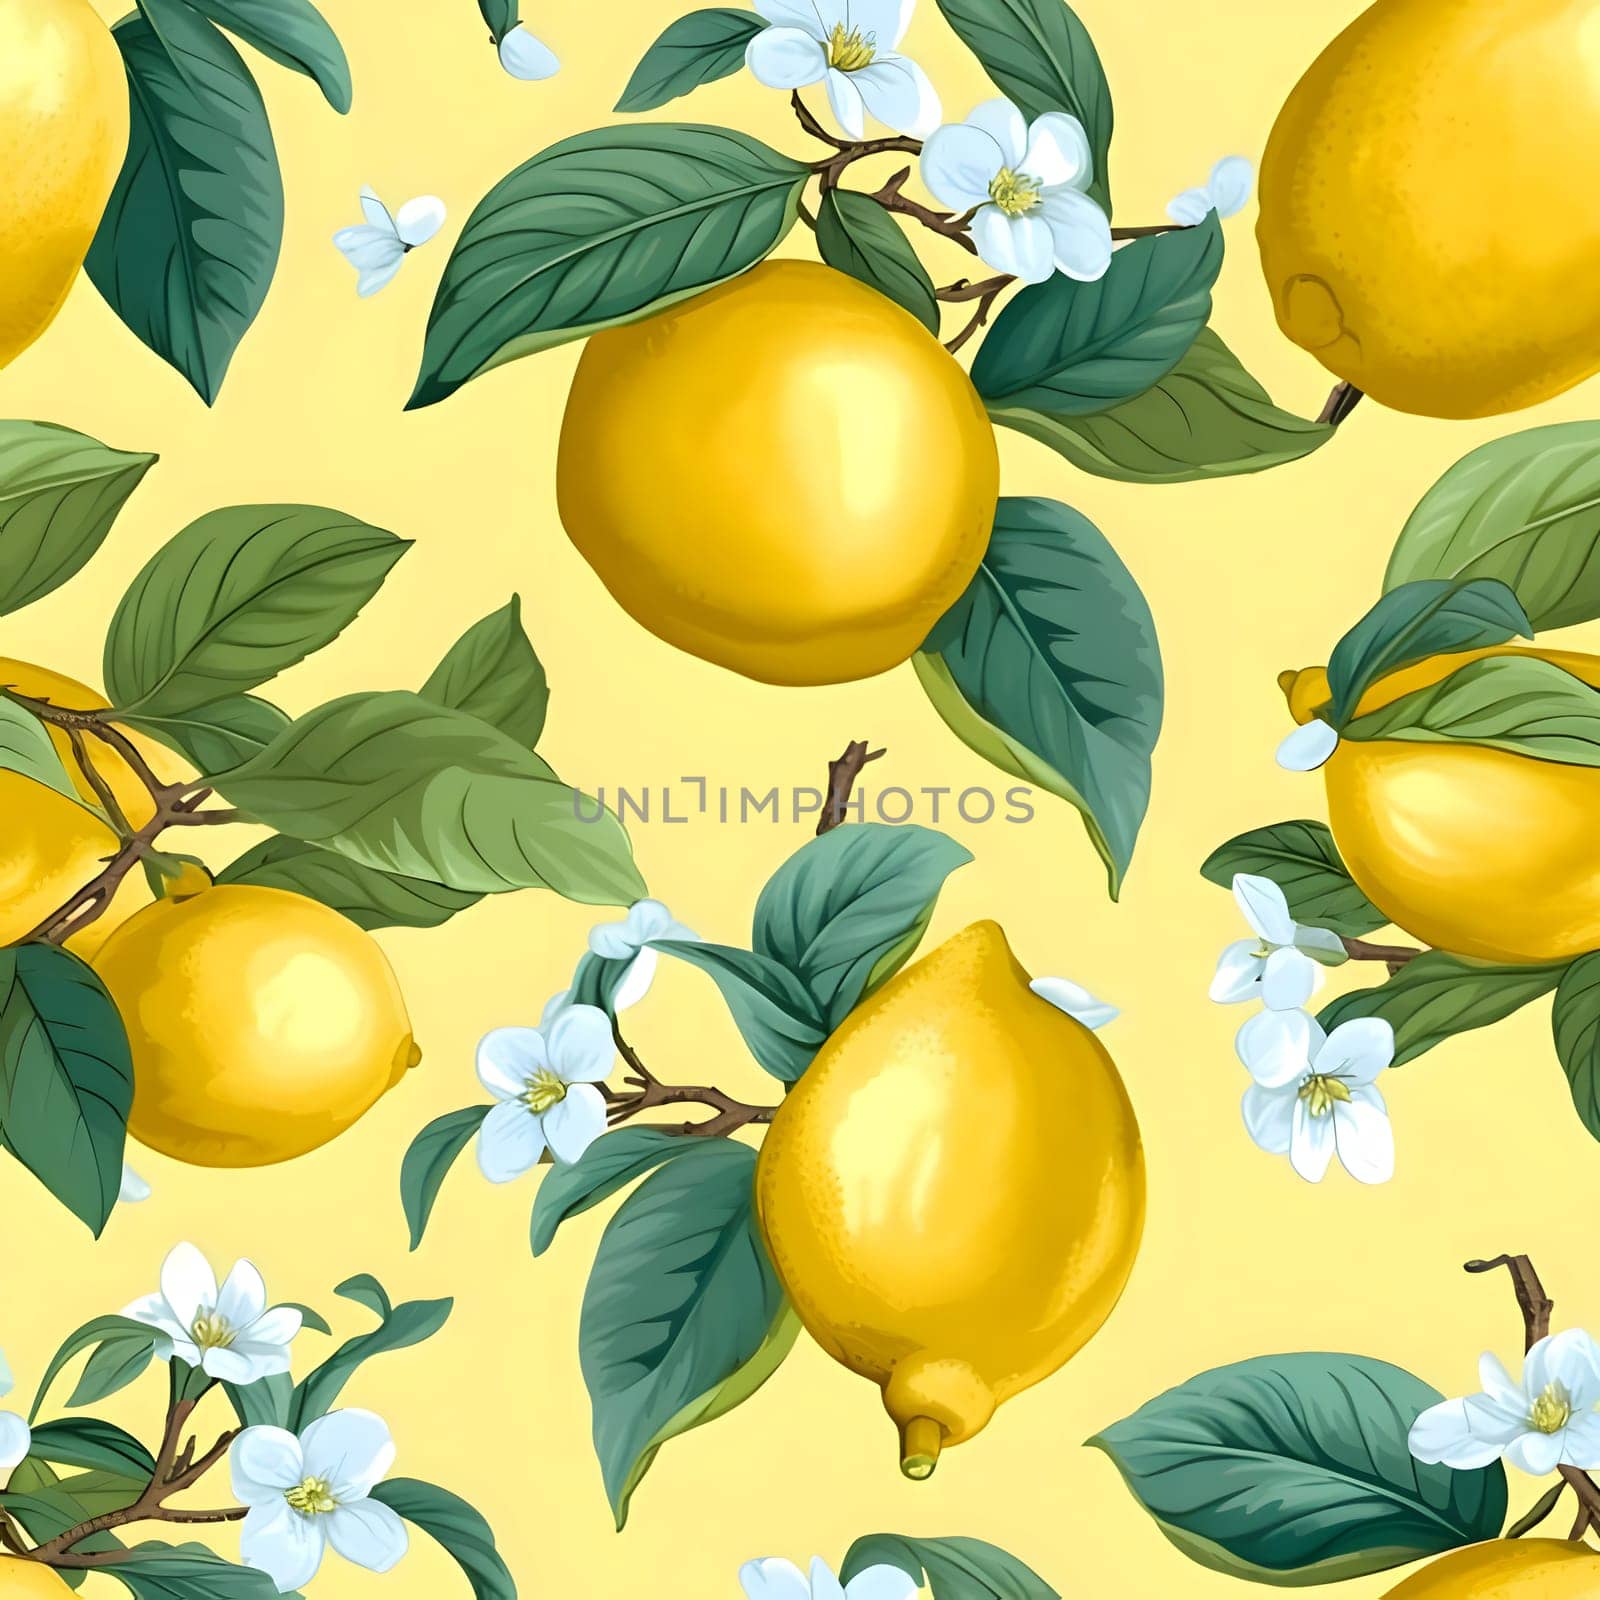 Patterns and banners backgrounds: Seamless pattern with lemons and flowers. Vector illustration.